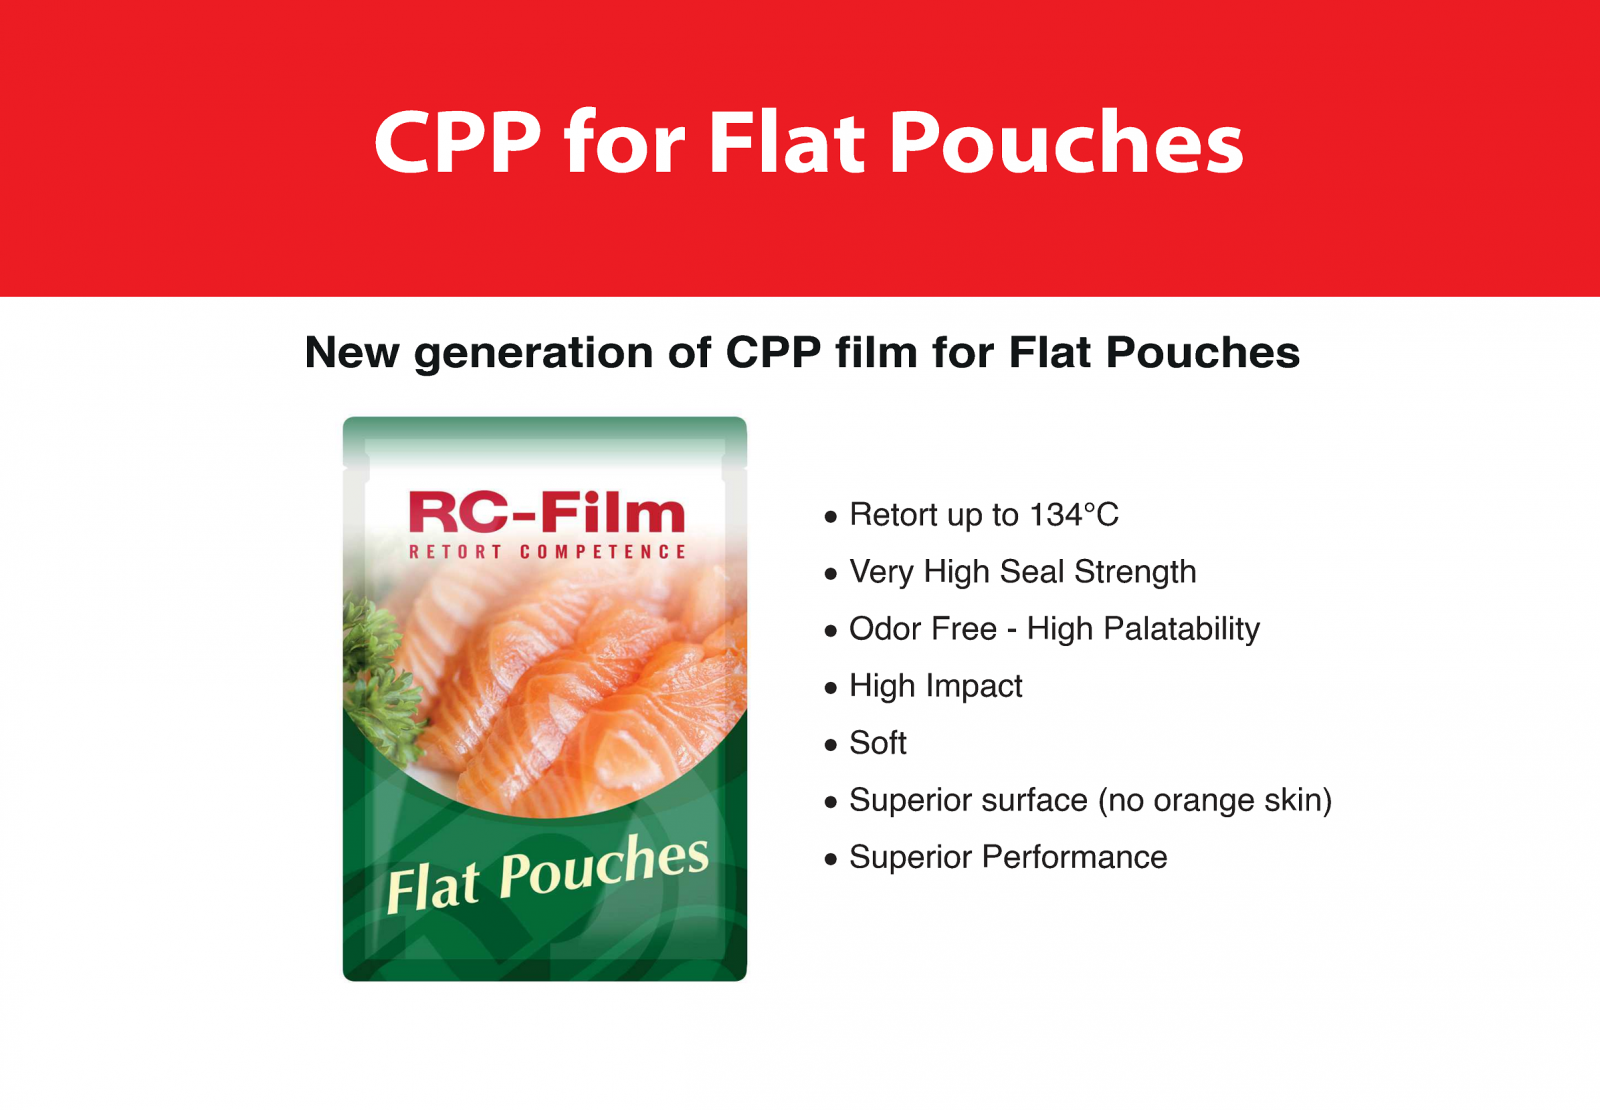 CPP_for_Flat_Pouches_RCH-71